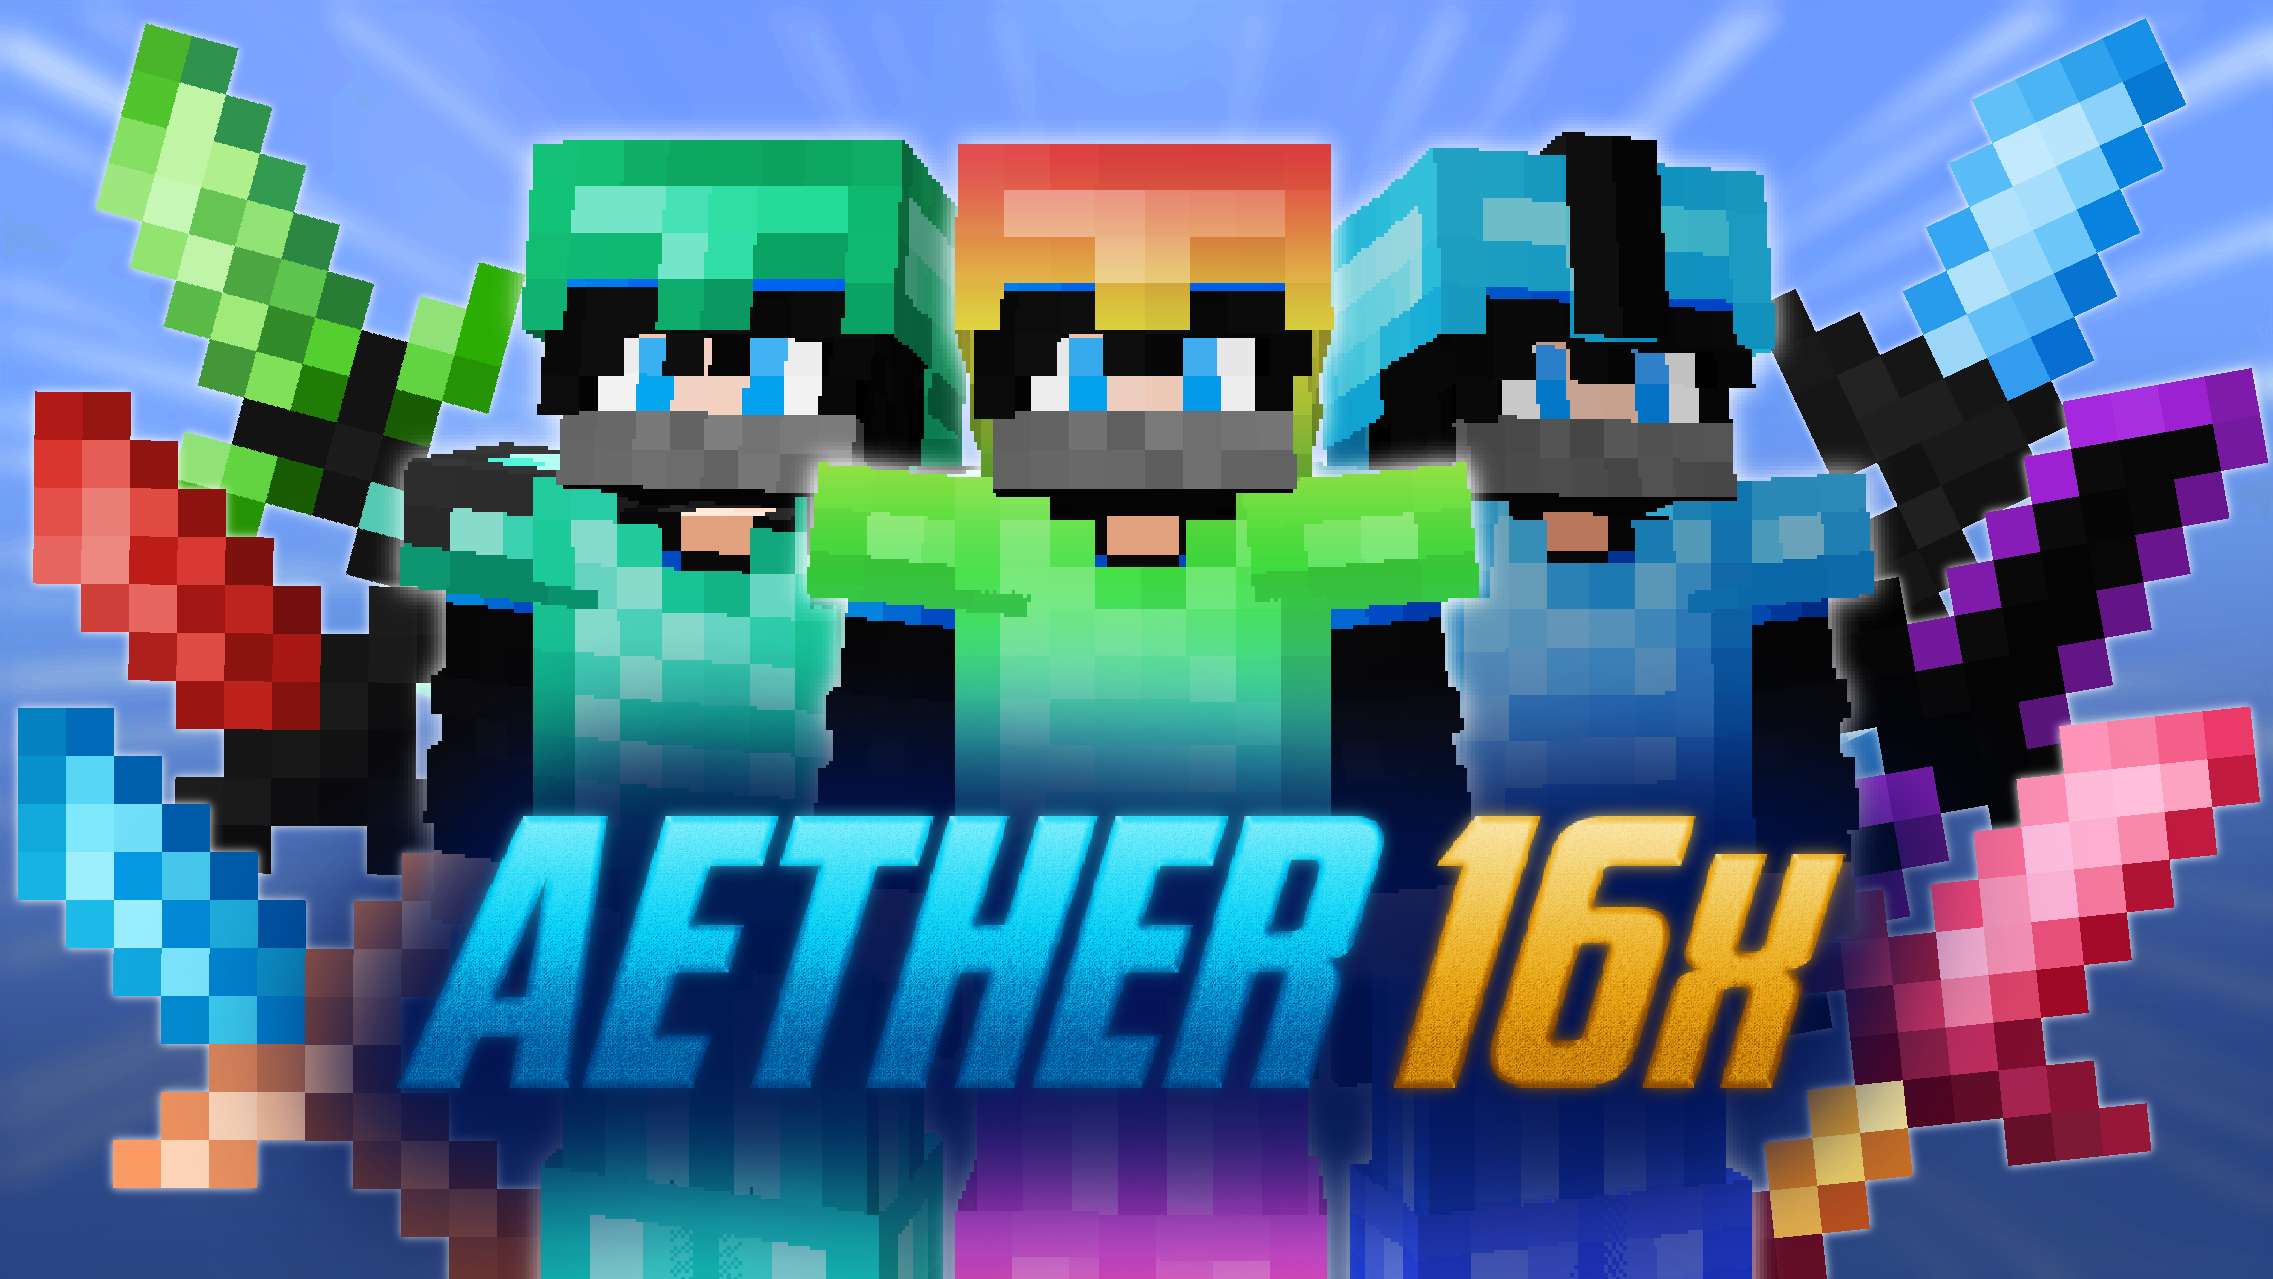 Aether  [Mixabletub] 16x by Mqryo on PvPRP